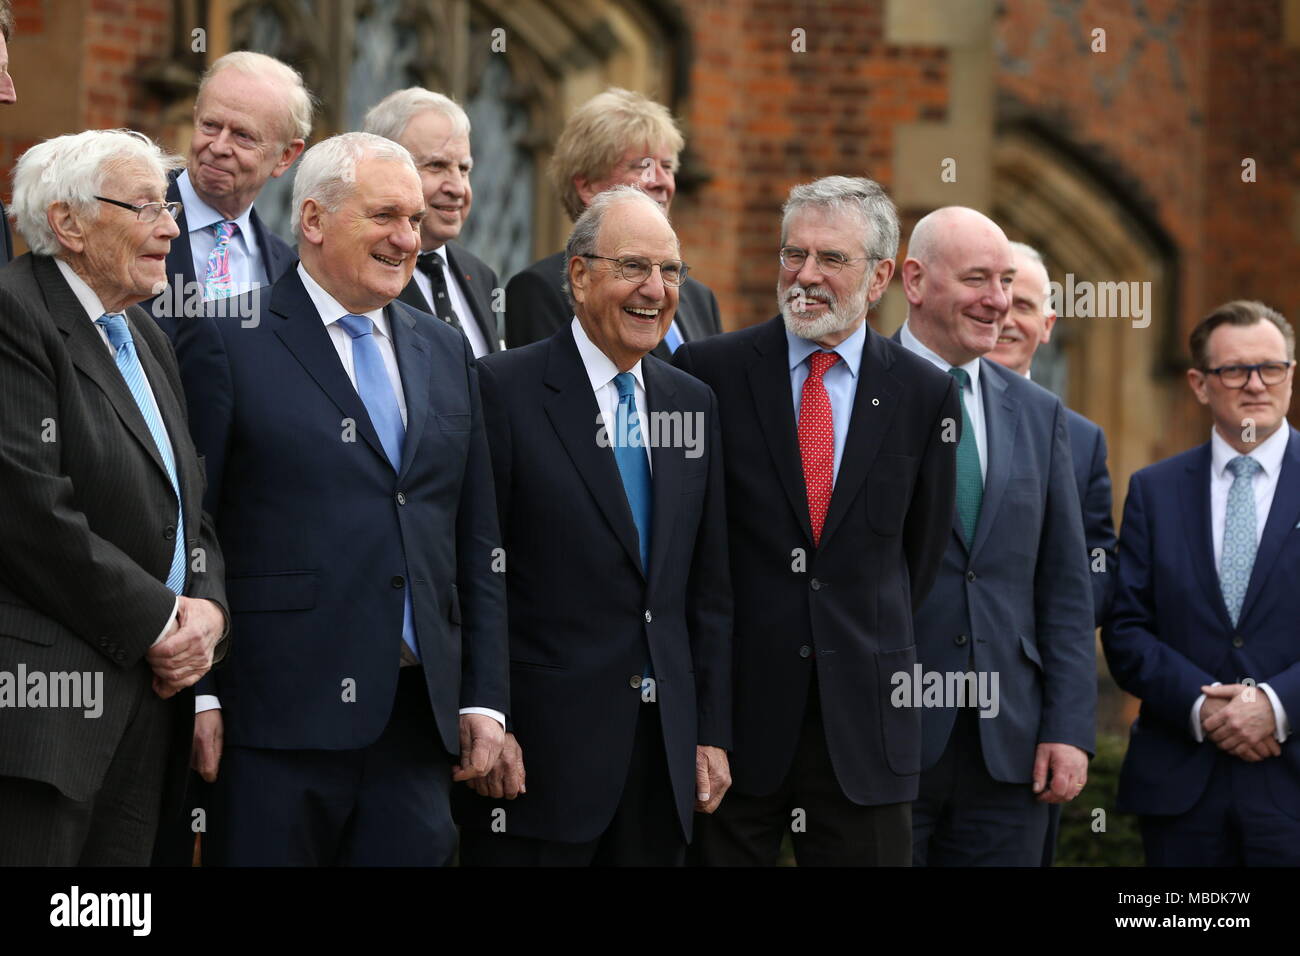 (back row left to right) Sir Reg Empey, Lord Paul Murphy of Torfaen, (front row left to right) Seamus Mallon, former taoiseach Bertie Ahern, Senator George Mitchell and Gerry Adams at an event to mark the 20th anniversary of the Good Friday Agreement, at Queen's University in Belfast. Stock Photo